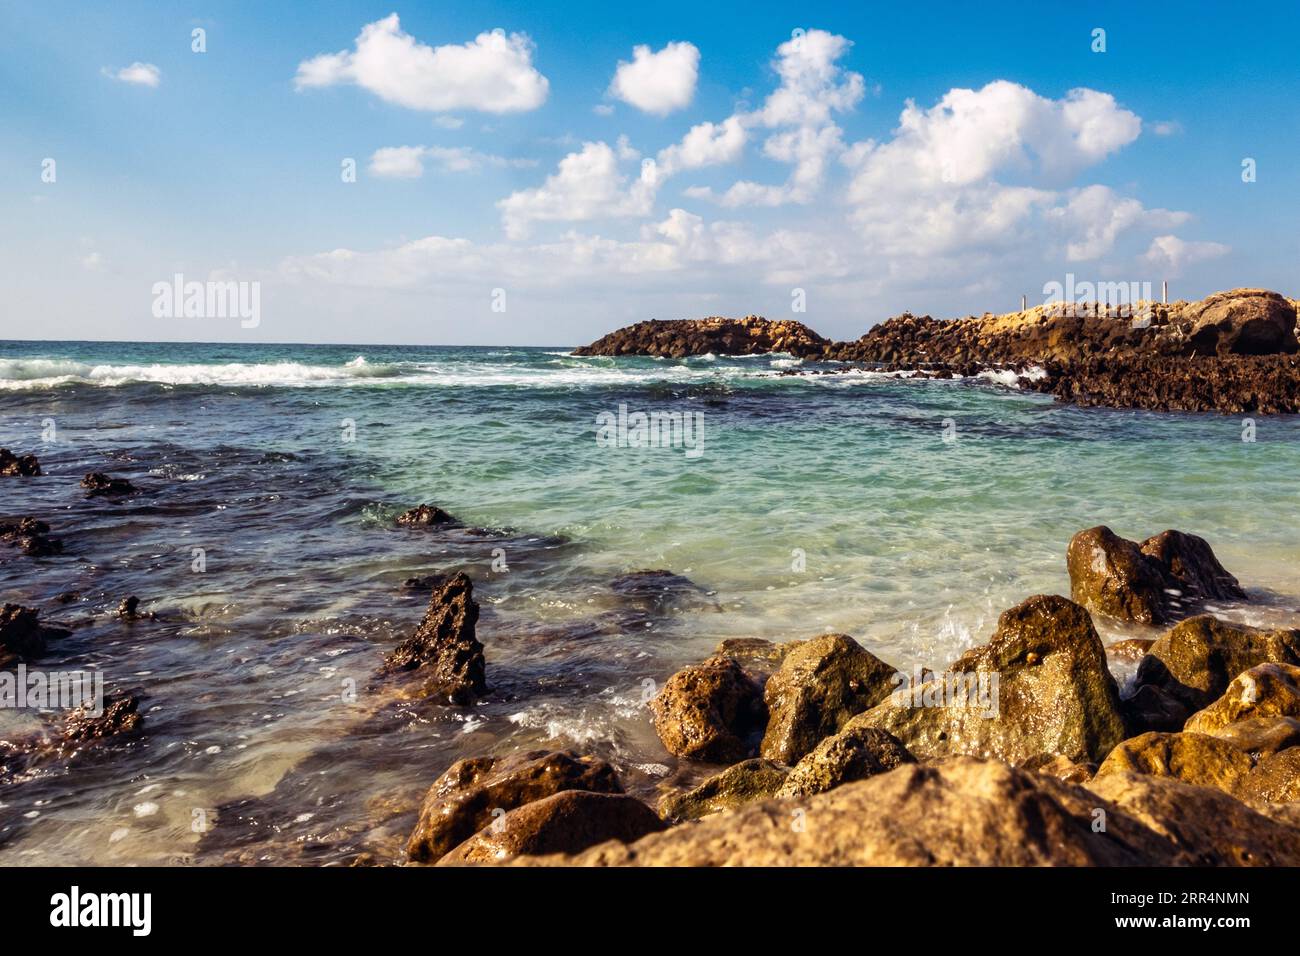 Shuwaymiyah beach, Dhofar, Oman, a haven for both nature enthusiasts and beachgoers, offering a serene escape from the hustle and bustle of city life. Stock Photo